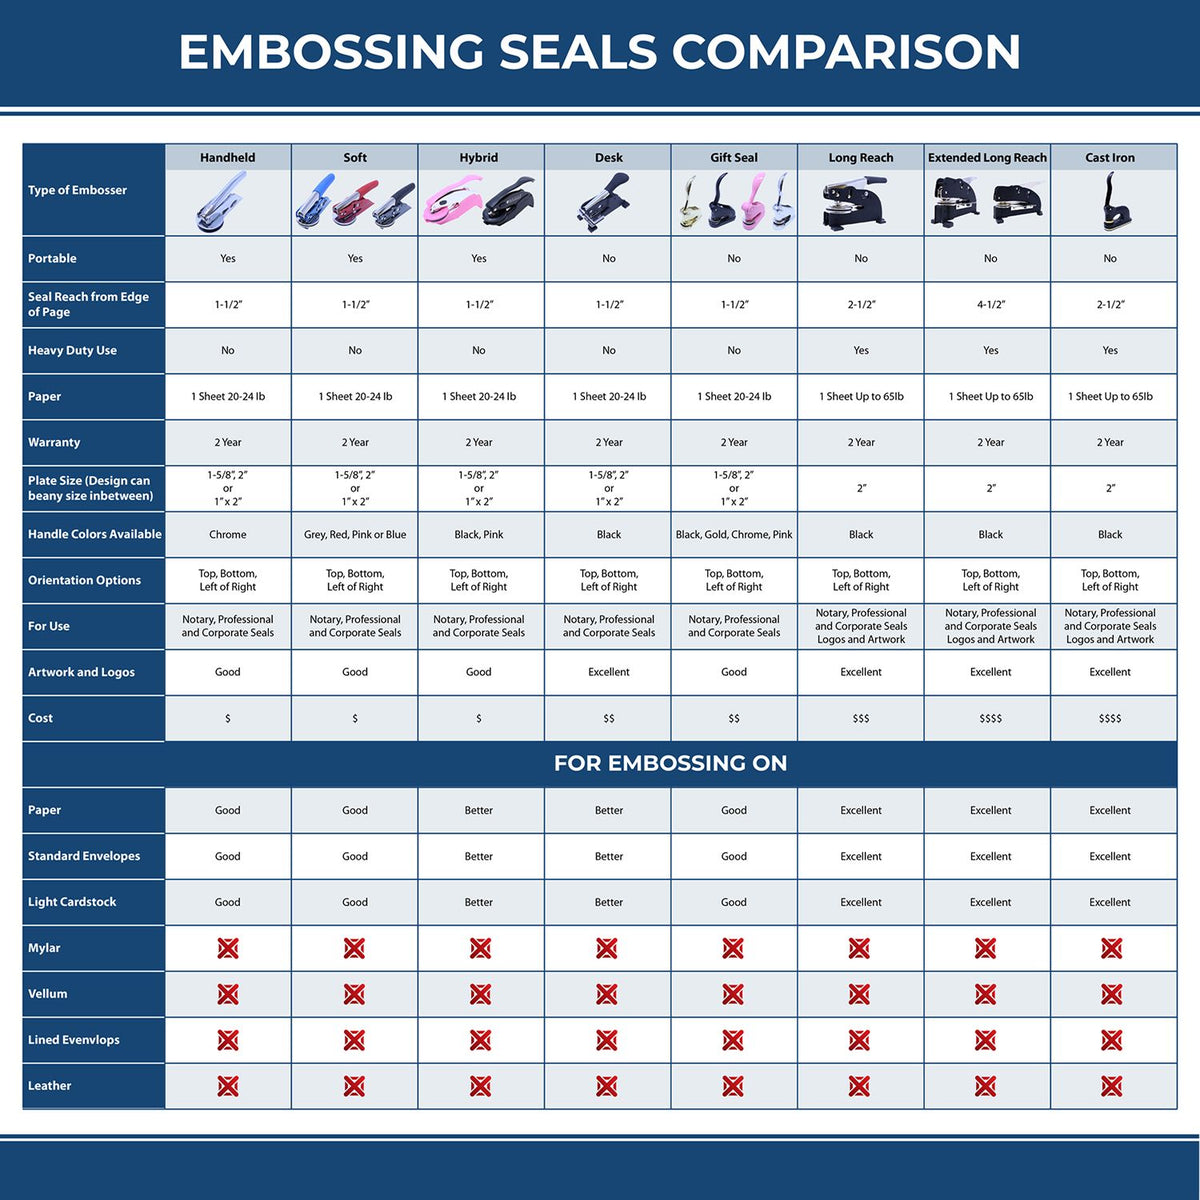 A comparison chart for the different types of mount models available for the Colorado Desk Surveyor Seal Embosser.